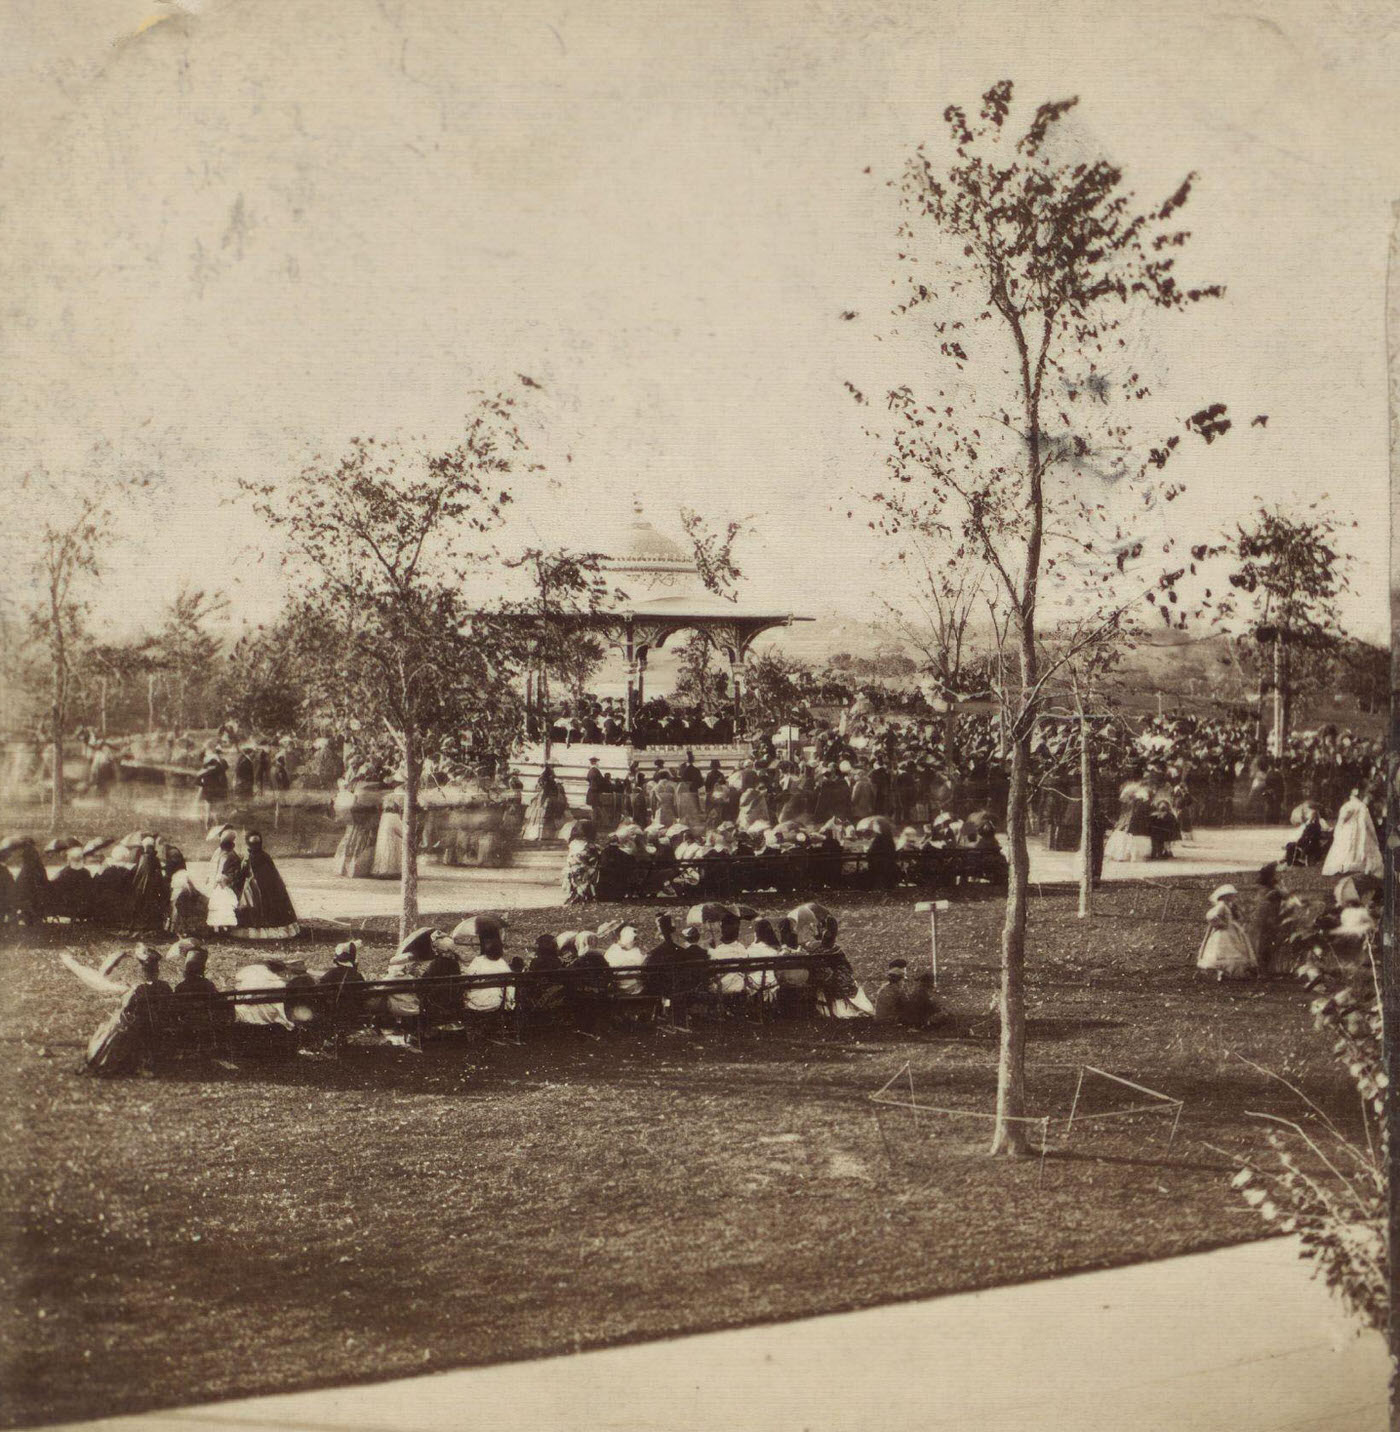 Music Day, Central Park, Crowd At An Event At The Music Pavilion, Manhattan, New York City, 1890S